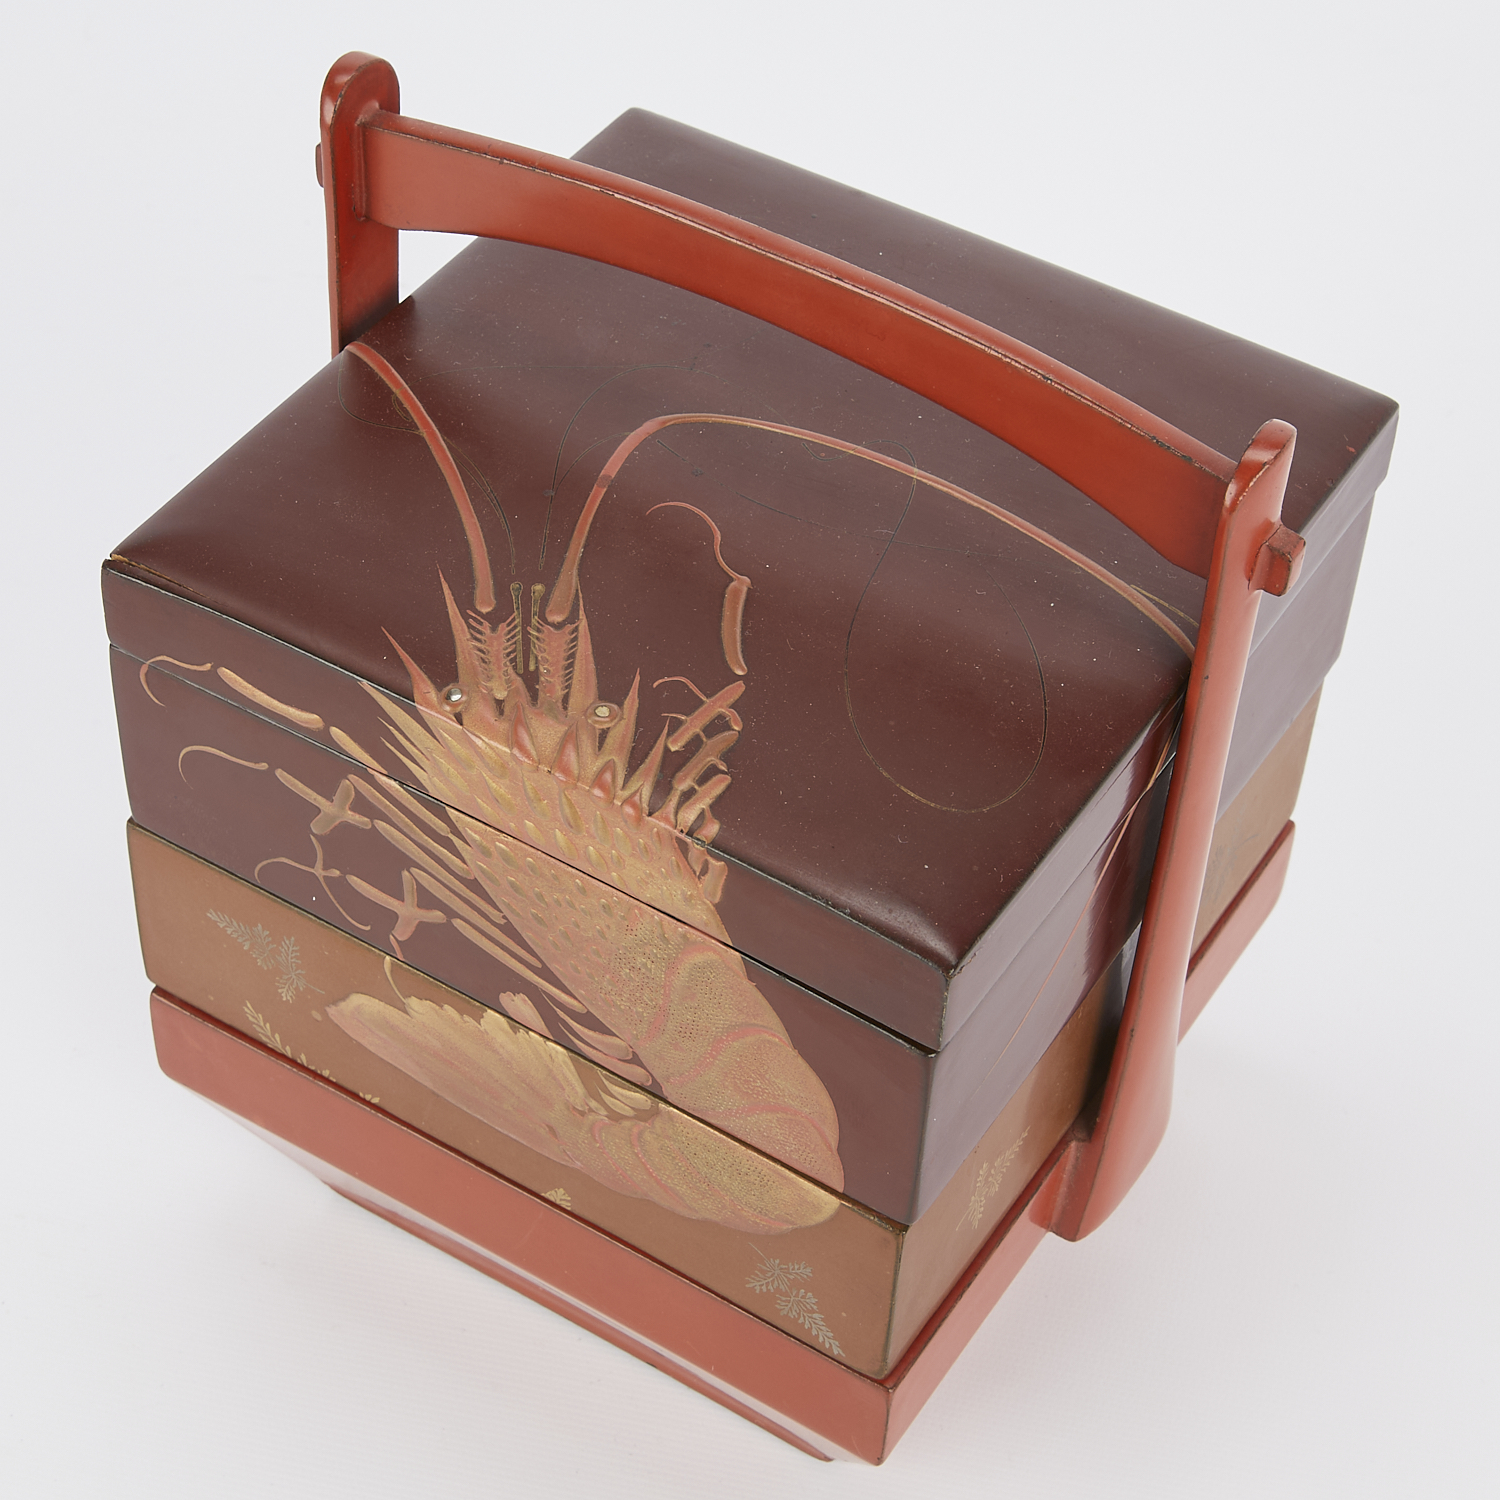 2 Japanese Lacquerware Boxes w/ Crustaceans - Image 16 of 17